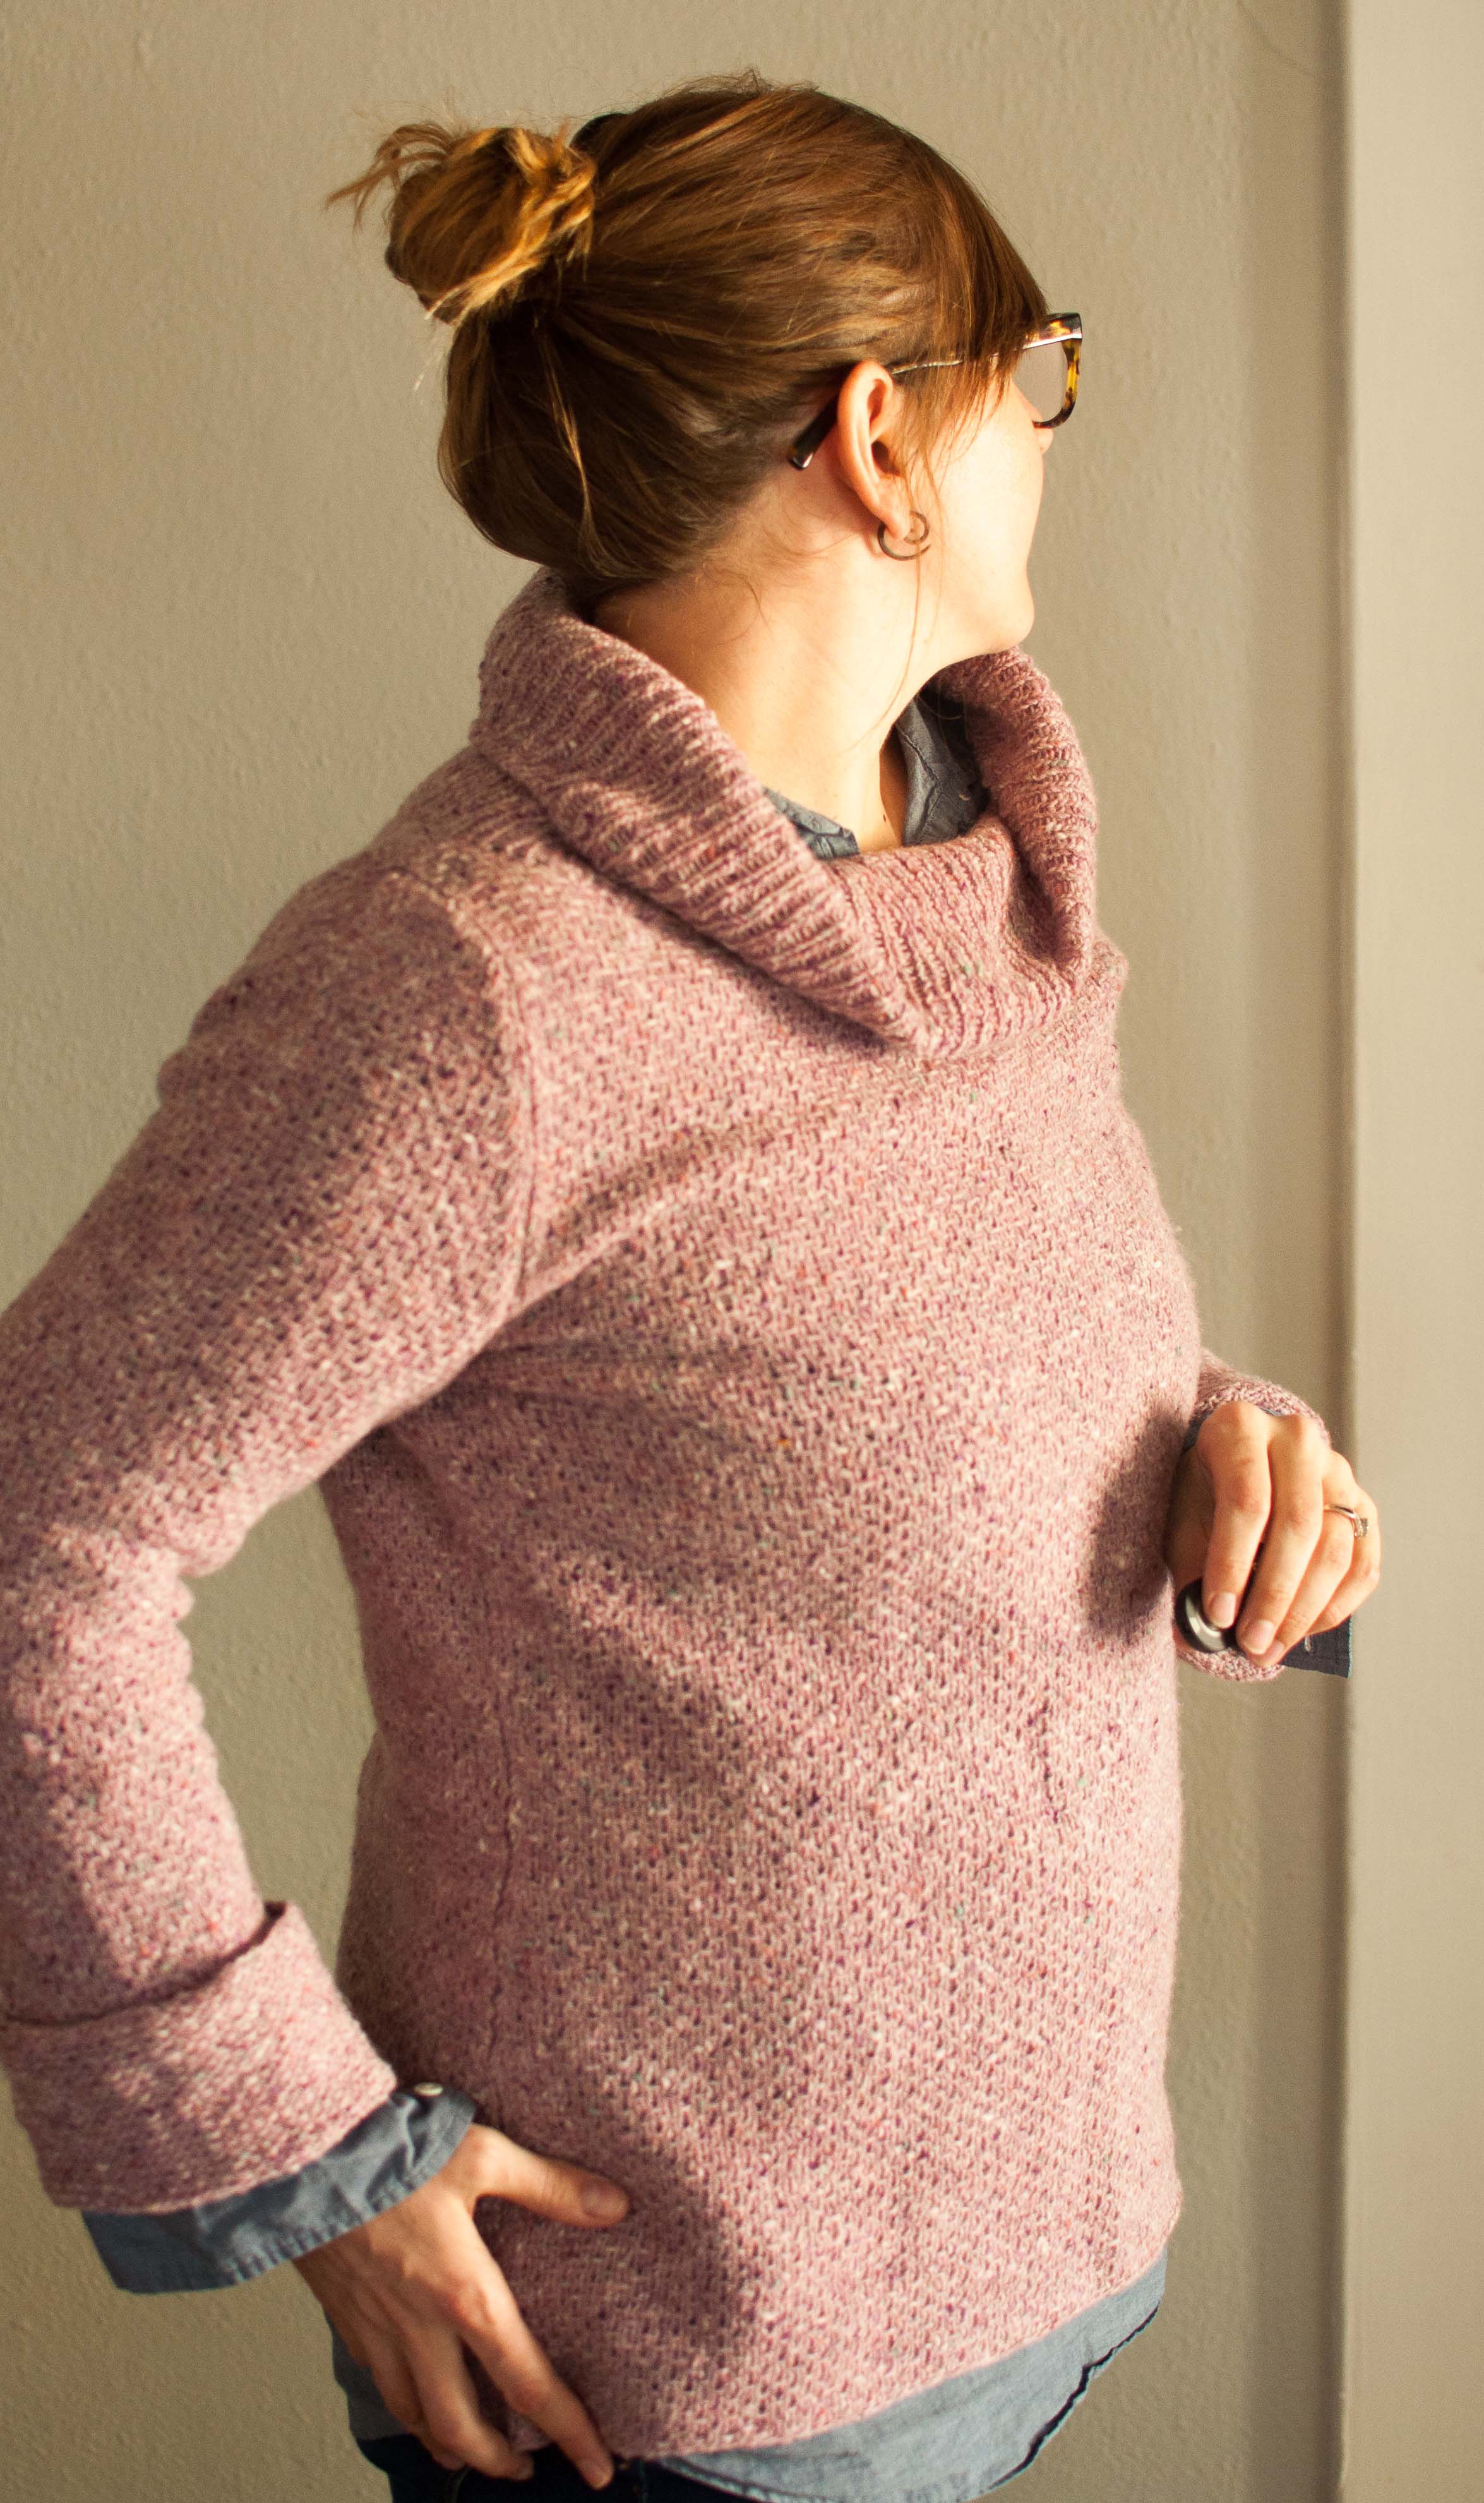 The magically adjustable sweater